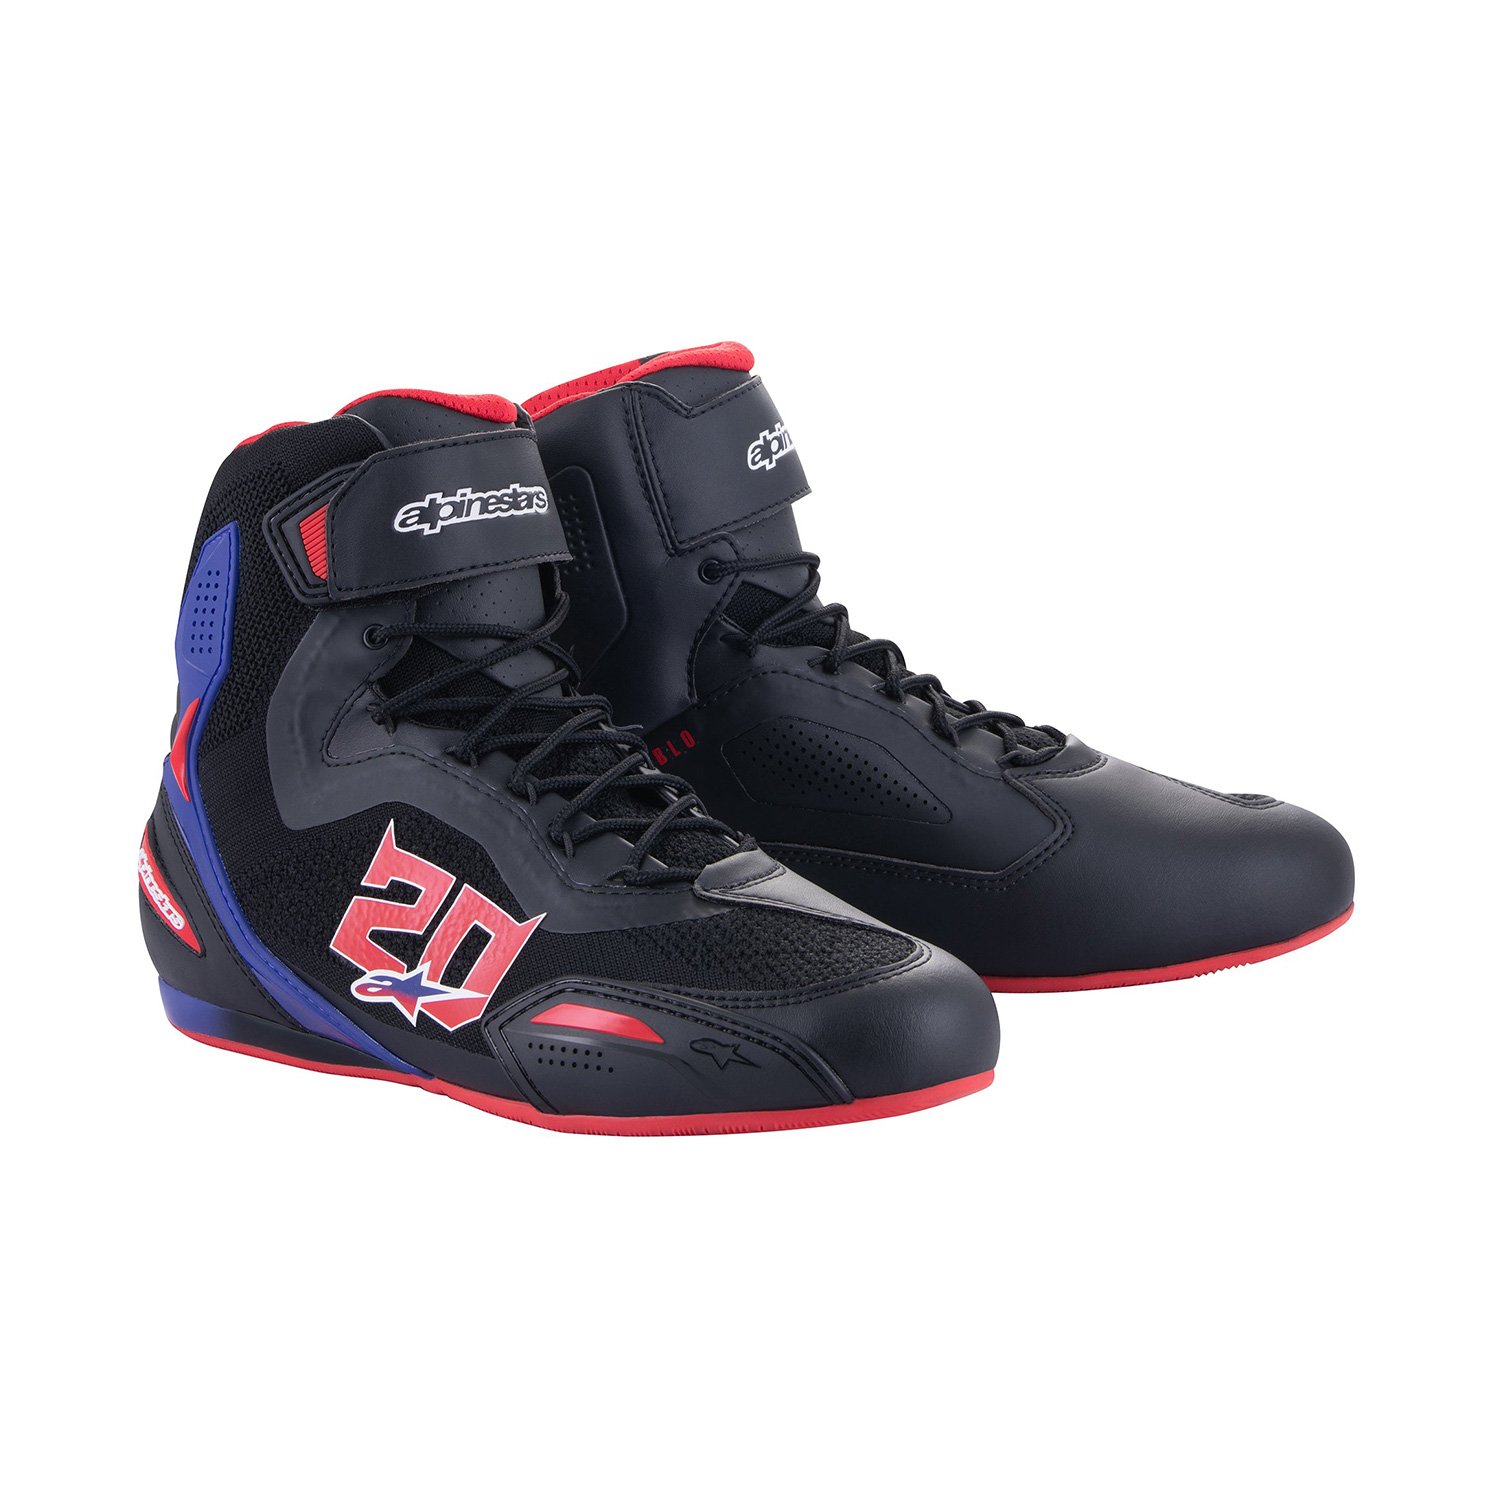 Image of EU Alpinestars FQ20 Faster-3 Rideknit Noir Bright Rouge Bleu Chaussures Taille US 8